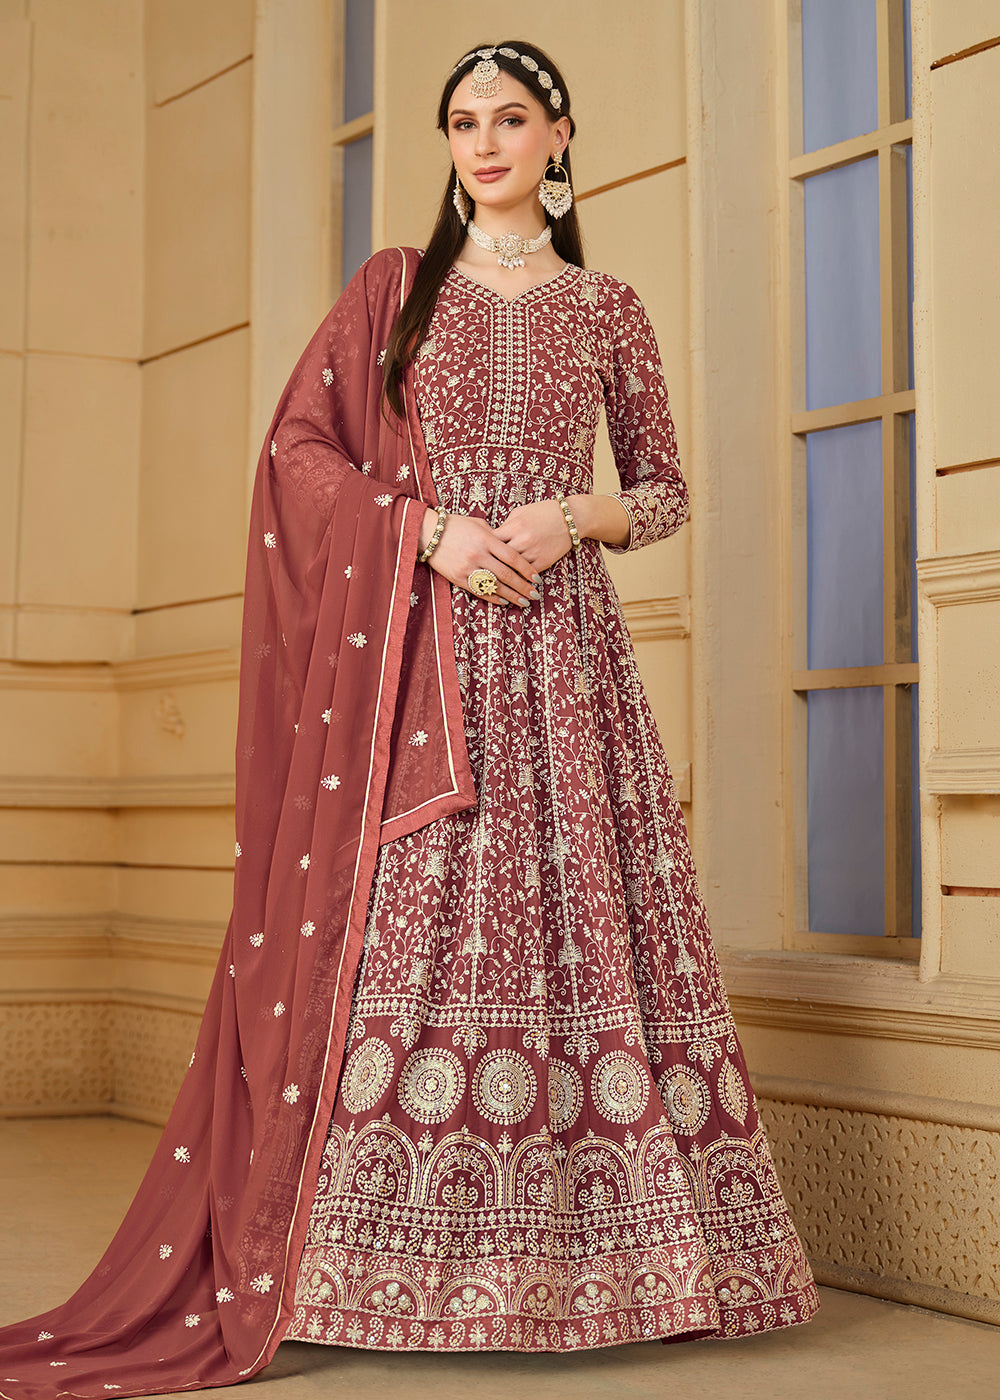 Buy Now Tangy Brown Thread & Sequins Georgette Anarkali Suit Online in USA, UK, Australia, New Zealand, Canada & Worldwide at Empress Clothing.